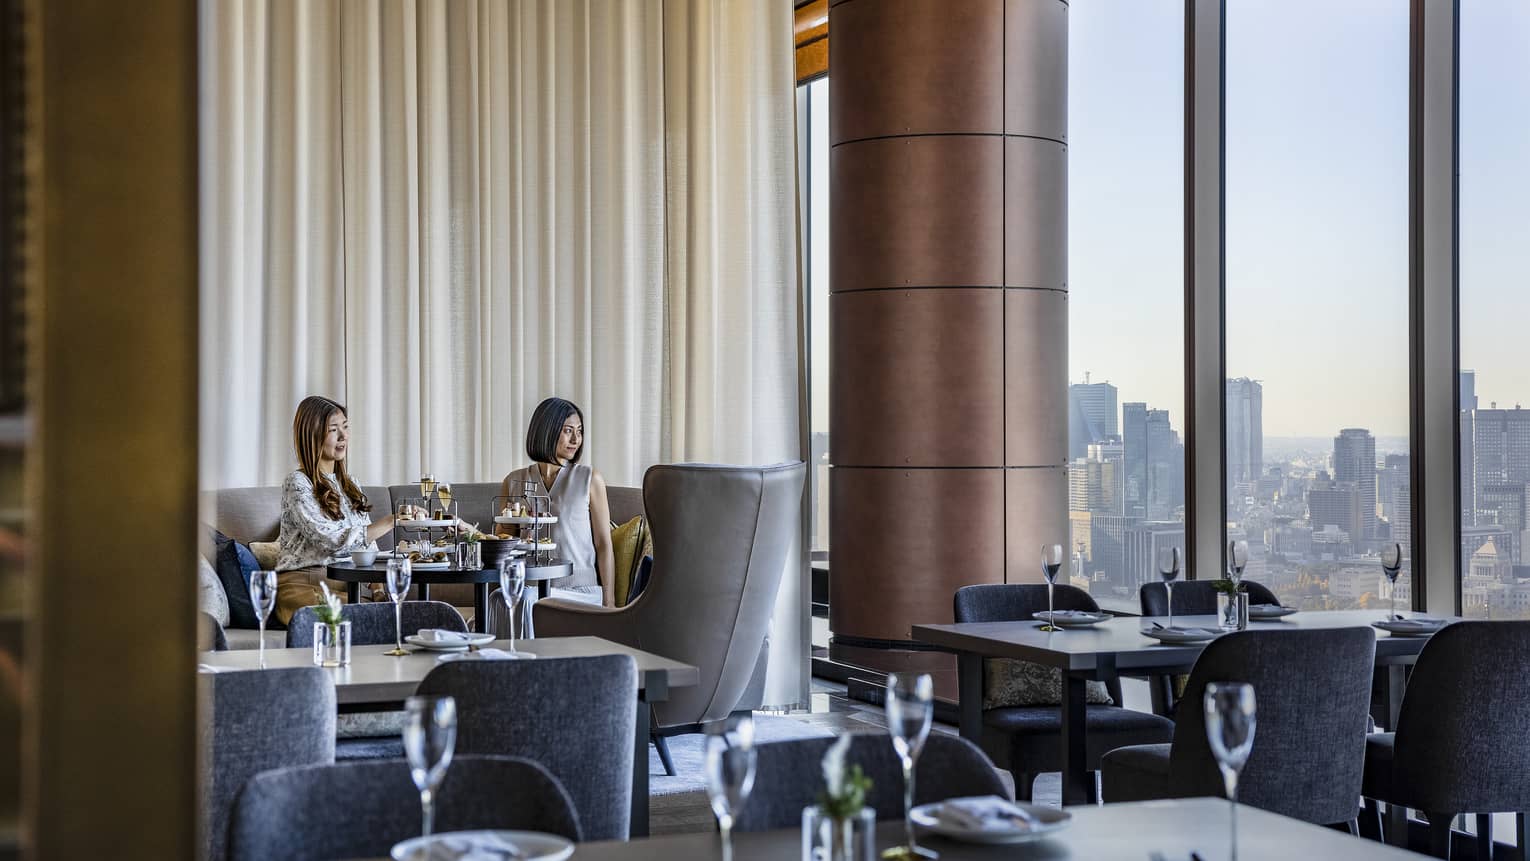 Two female guests enjoy Afternoon Tea at The Lounge as they gaze out the floor-to-ceiling windows at the Tokyo skyline